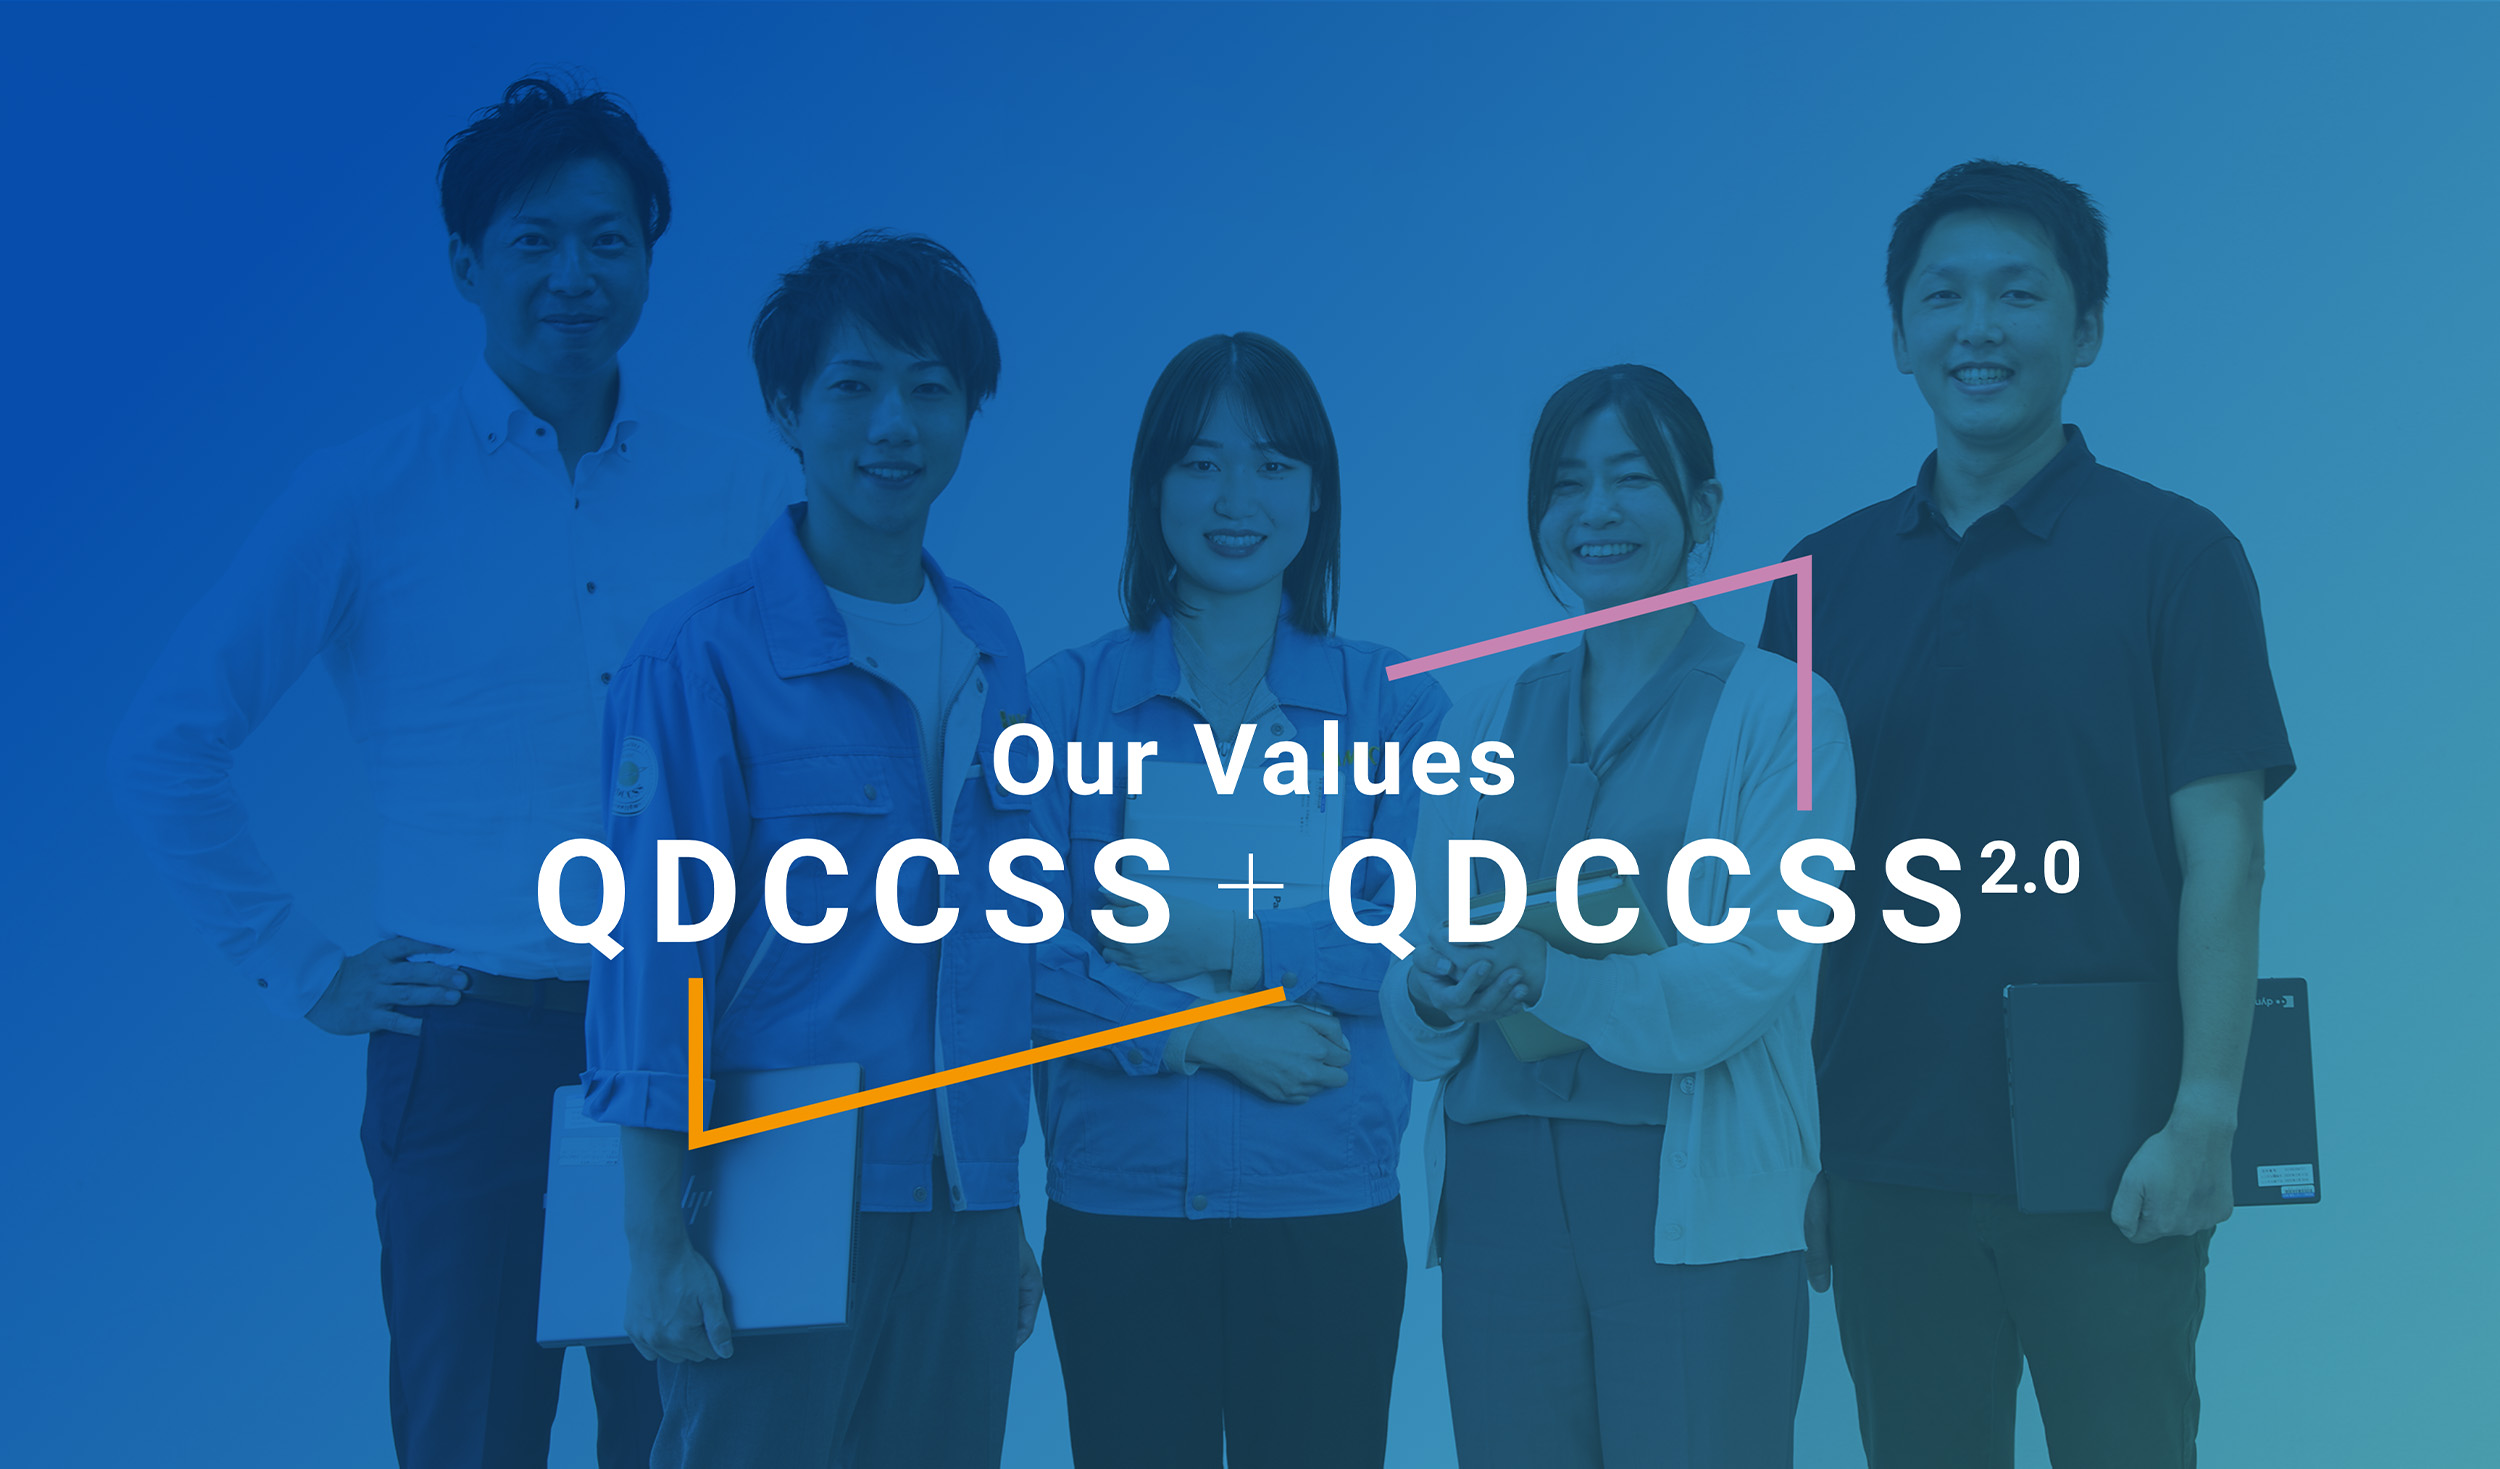 Creating Value for MJC QDCCSS